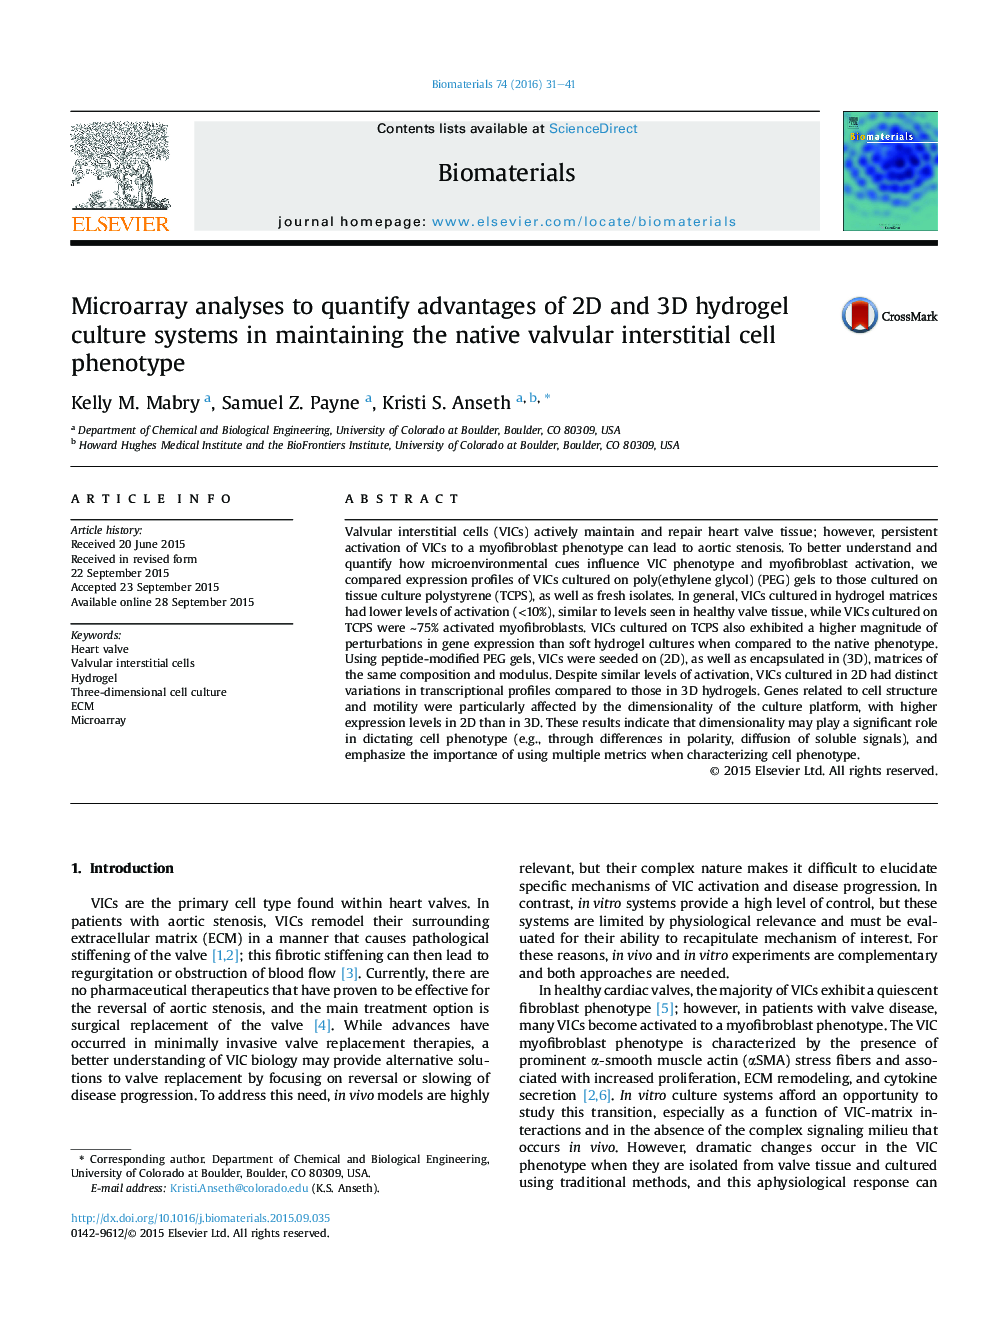 Microarray analyses to quantify advantages of 2D and 3D hydrogel culture systems in maintaining the native valvular interstitial cell phenotype